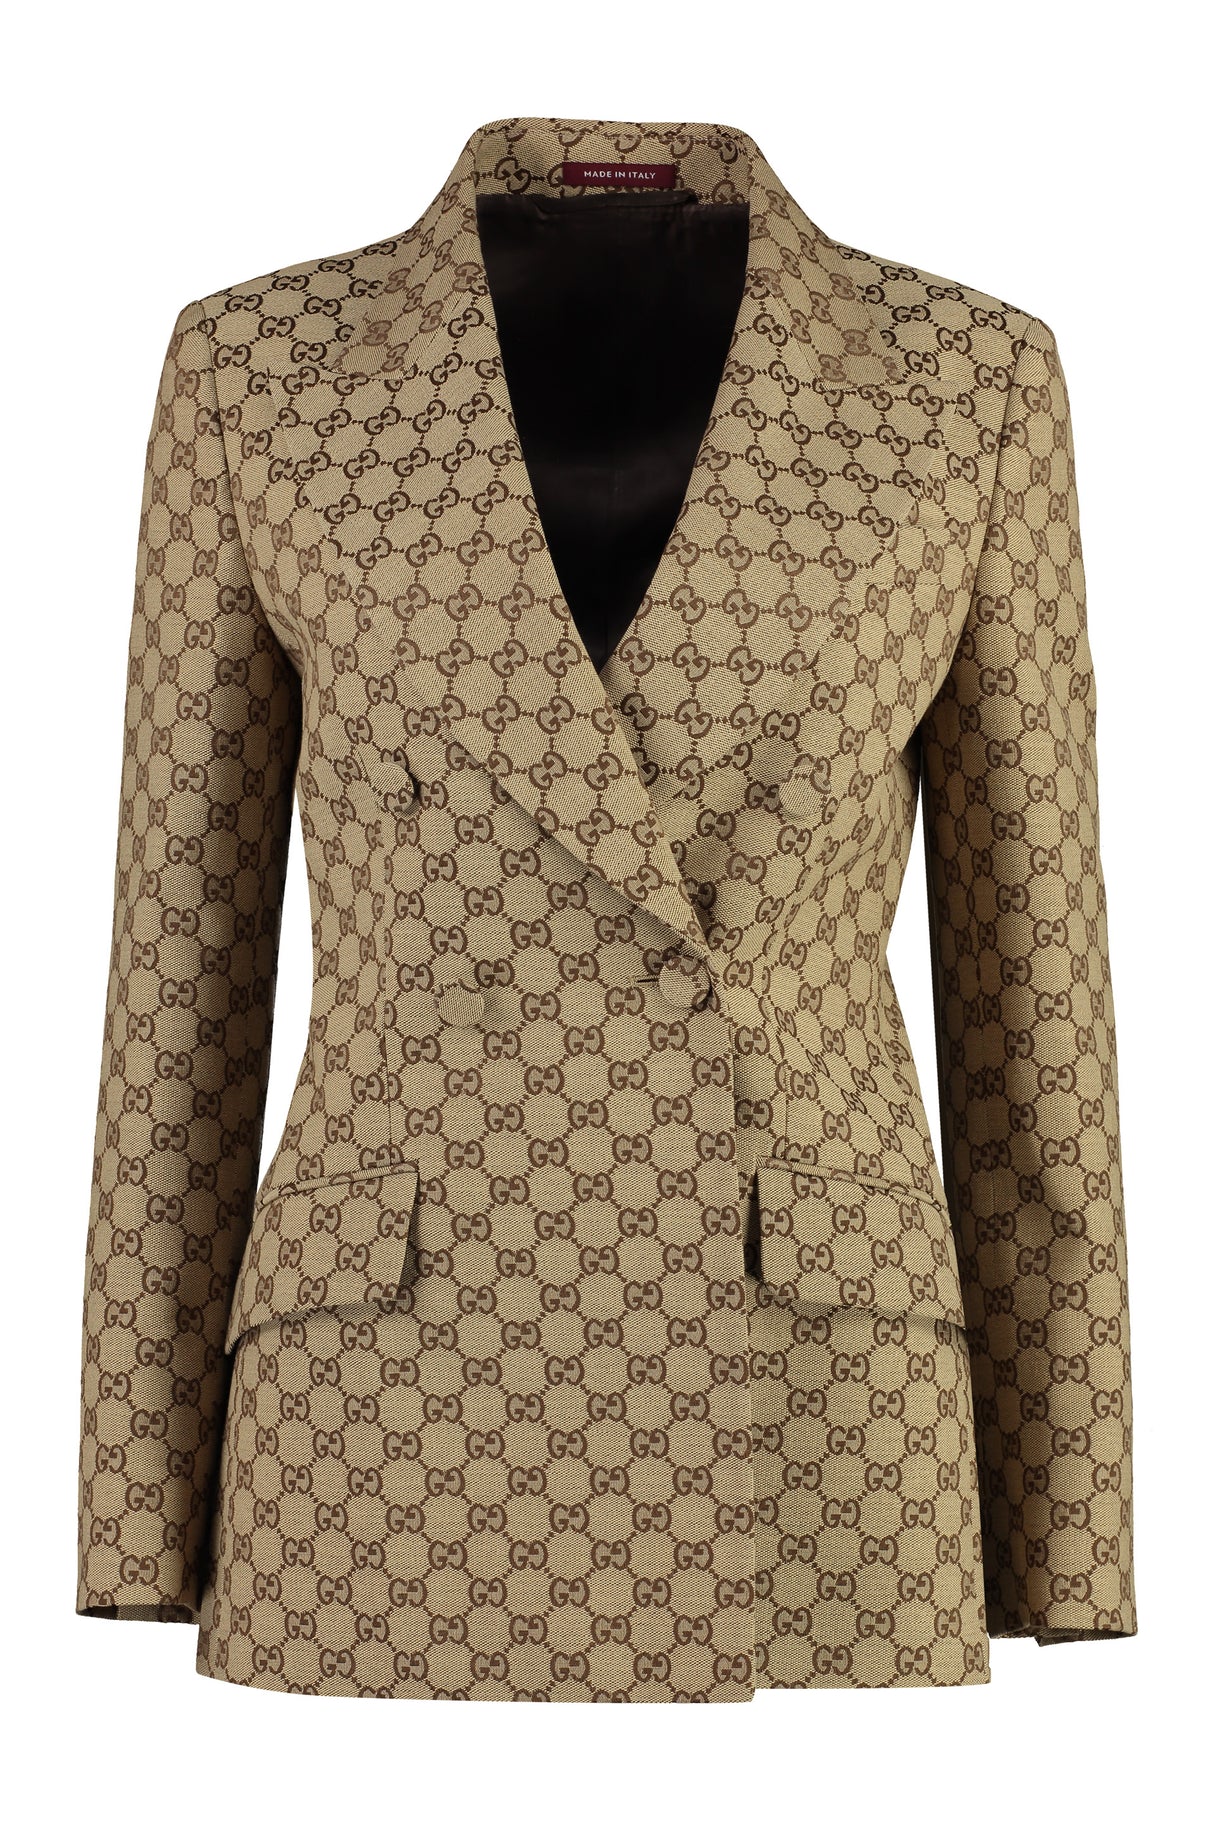 GUCCI Beige Double-Breasted Original GG Fabric Jacket with Padded Shoulders for Women